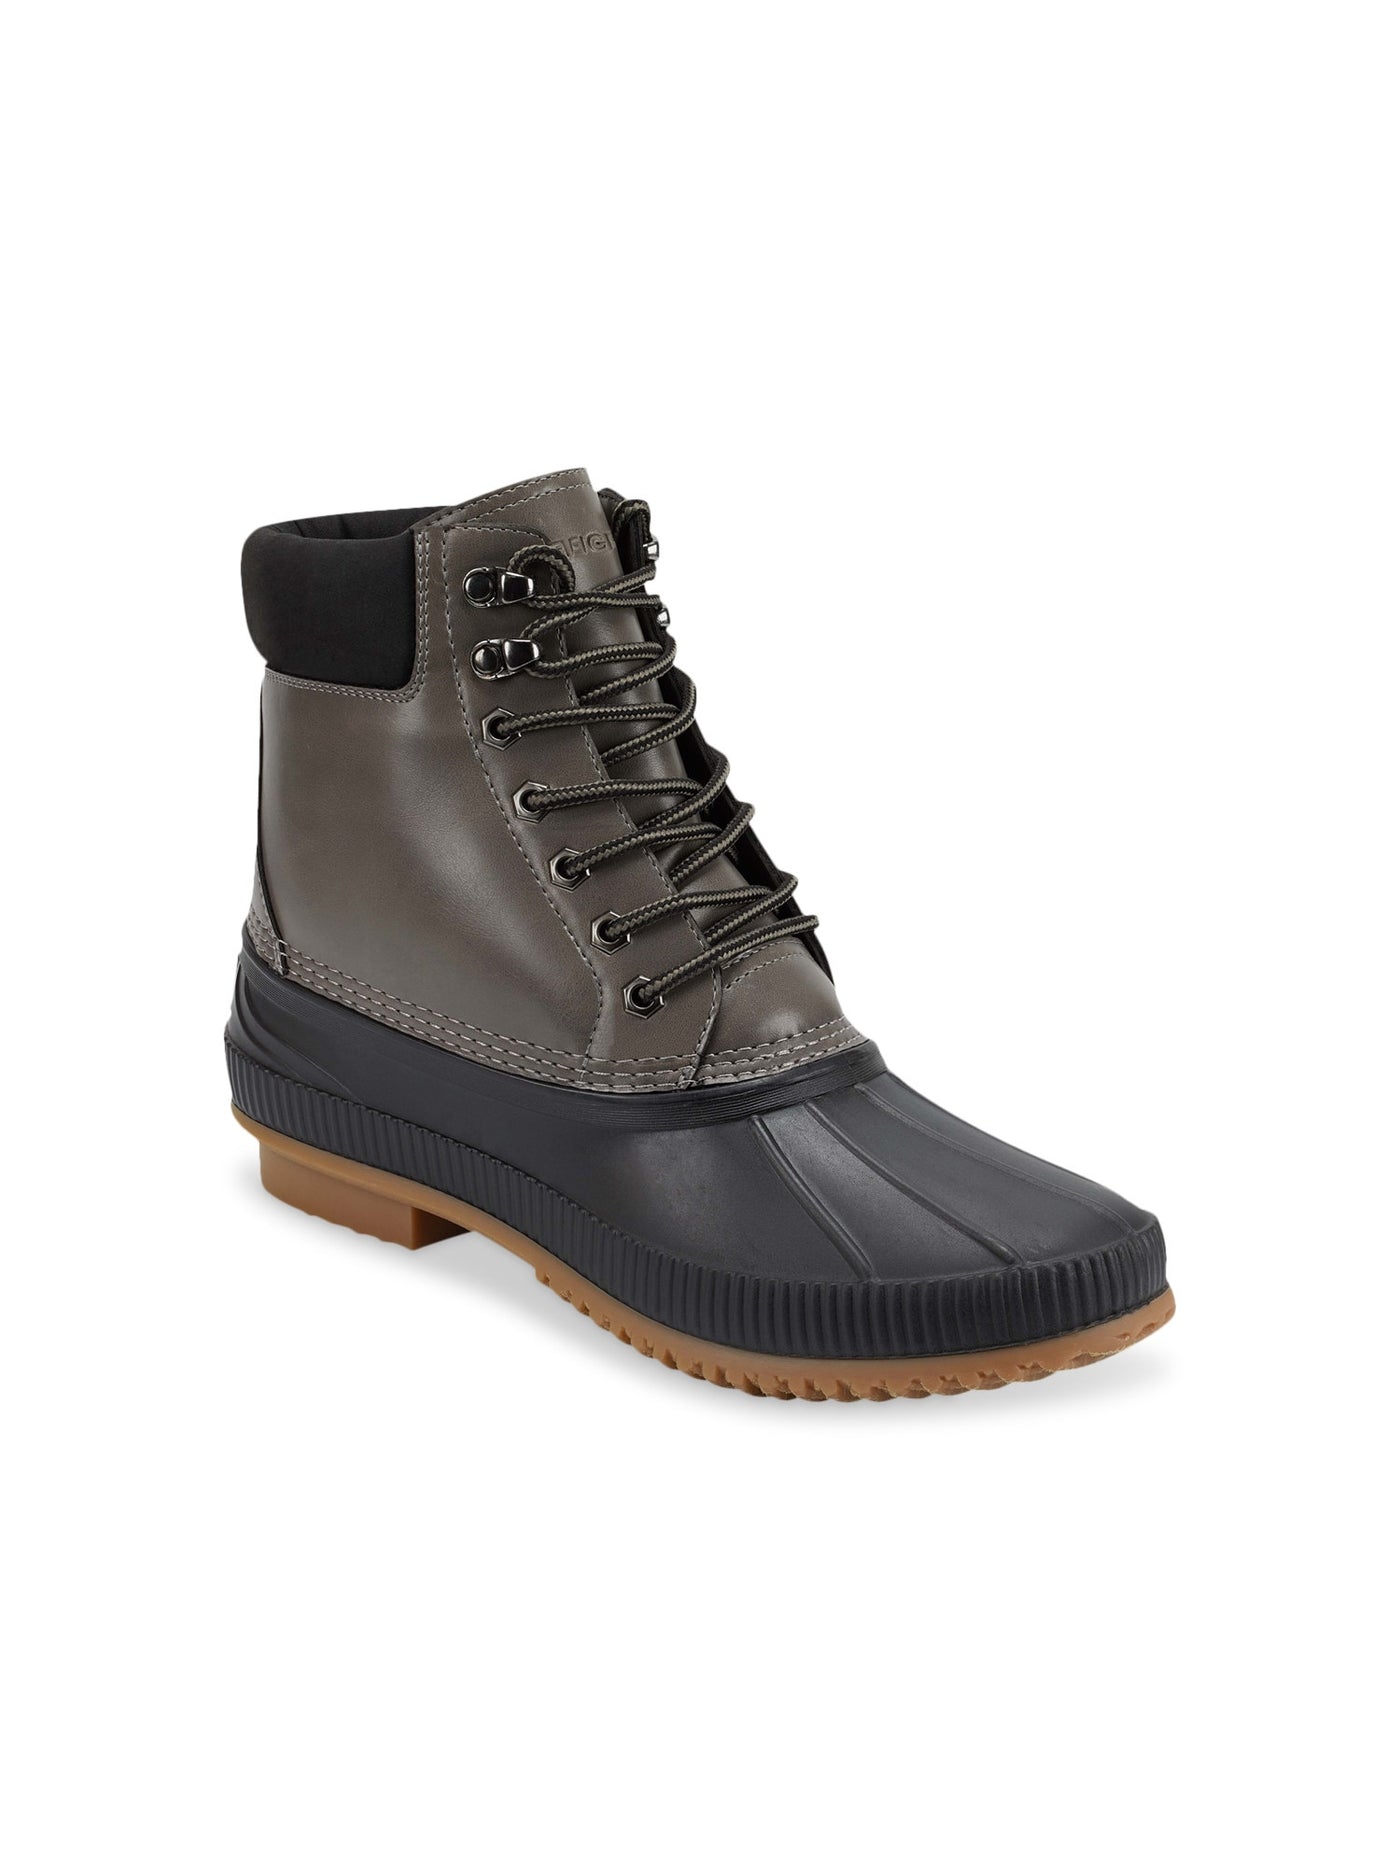 TOMMY HILFIGER Mens Gray Color Block Cushioned Collar Waterproof Padded Colins 2 Round Toe Lace-Up Duck Boots 13